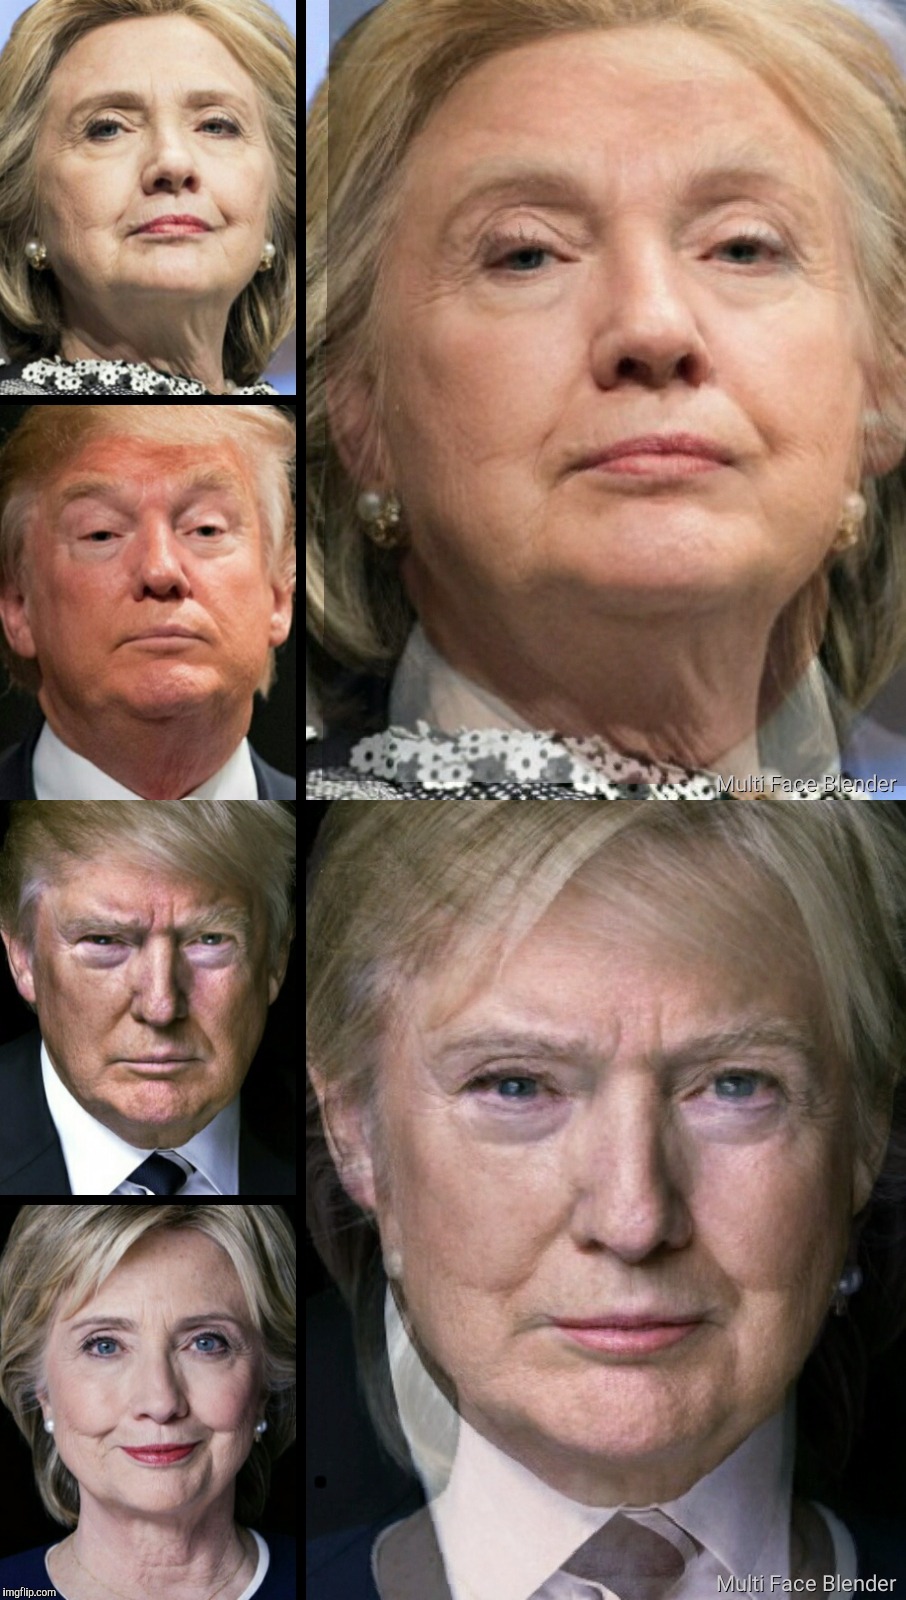 Aliens have abducted them both.  Bad news, they are coming back as hybrids. Say hello to Hillald and Donary | . | image tagged in memes,donald trump,hillary clinton,president 2016,election,nightmare | made w/ Imgflip meme maker